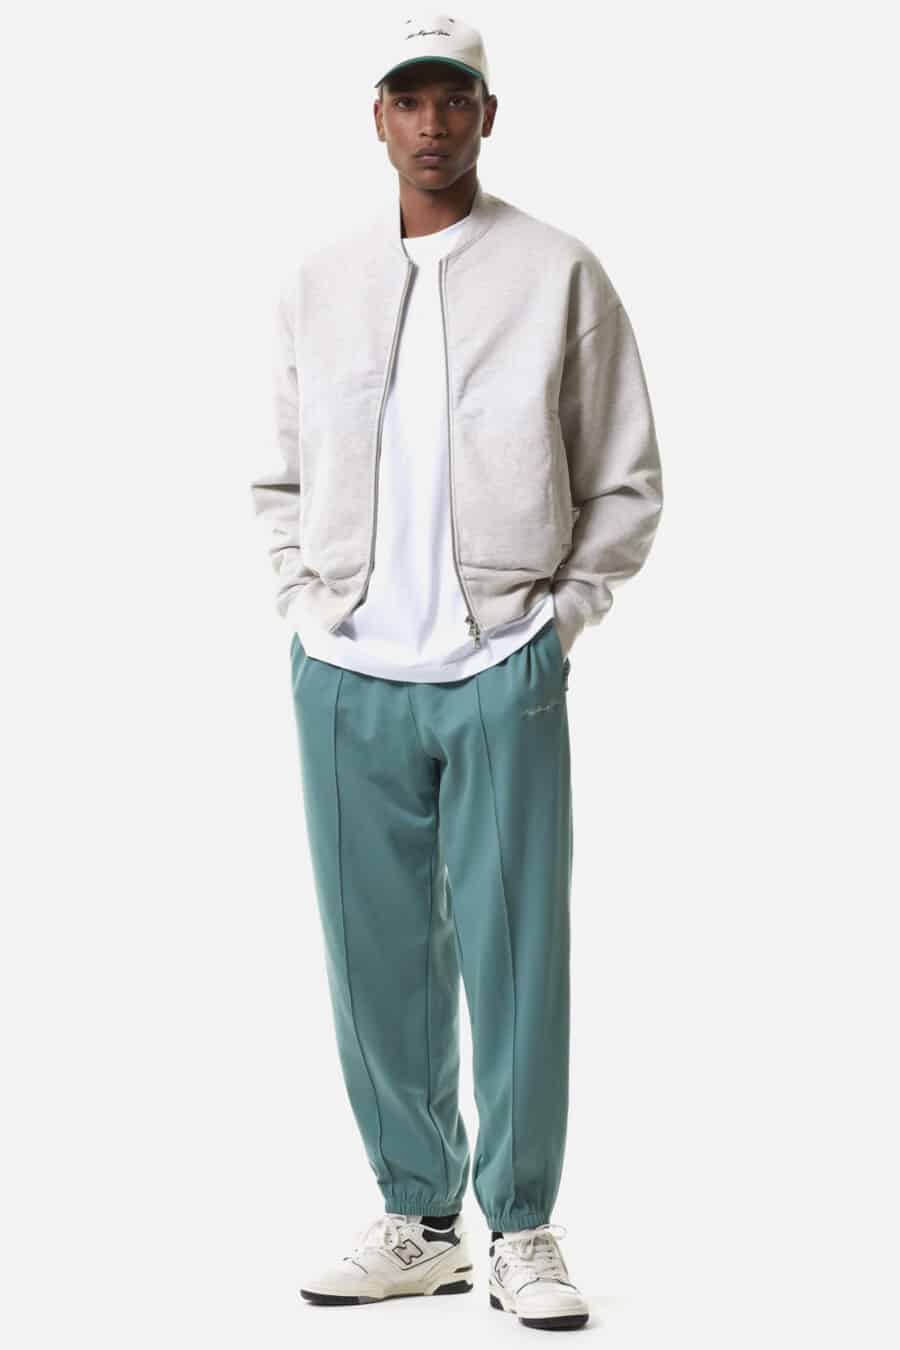 Men's green track pants, white T-shirt, stone bomber jacket, white baseball cap and white New Balance sneakers outfit